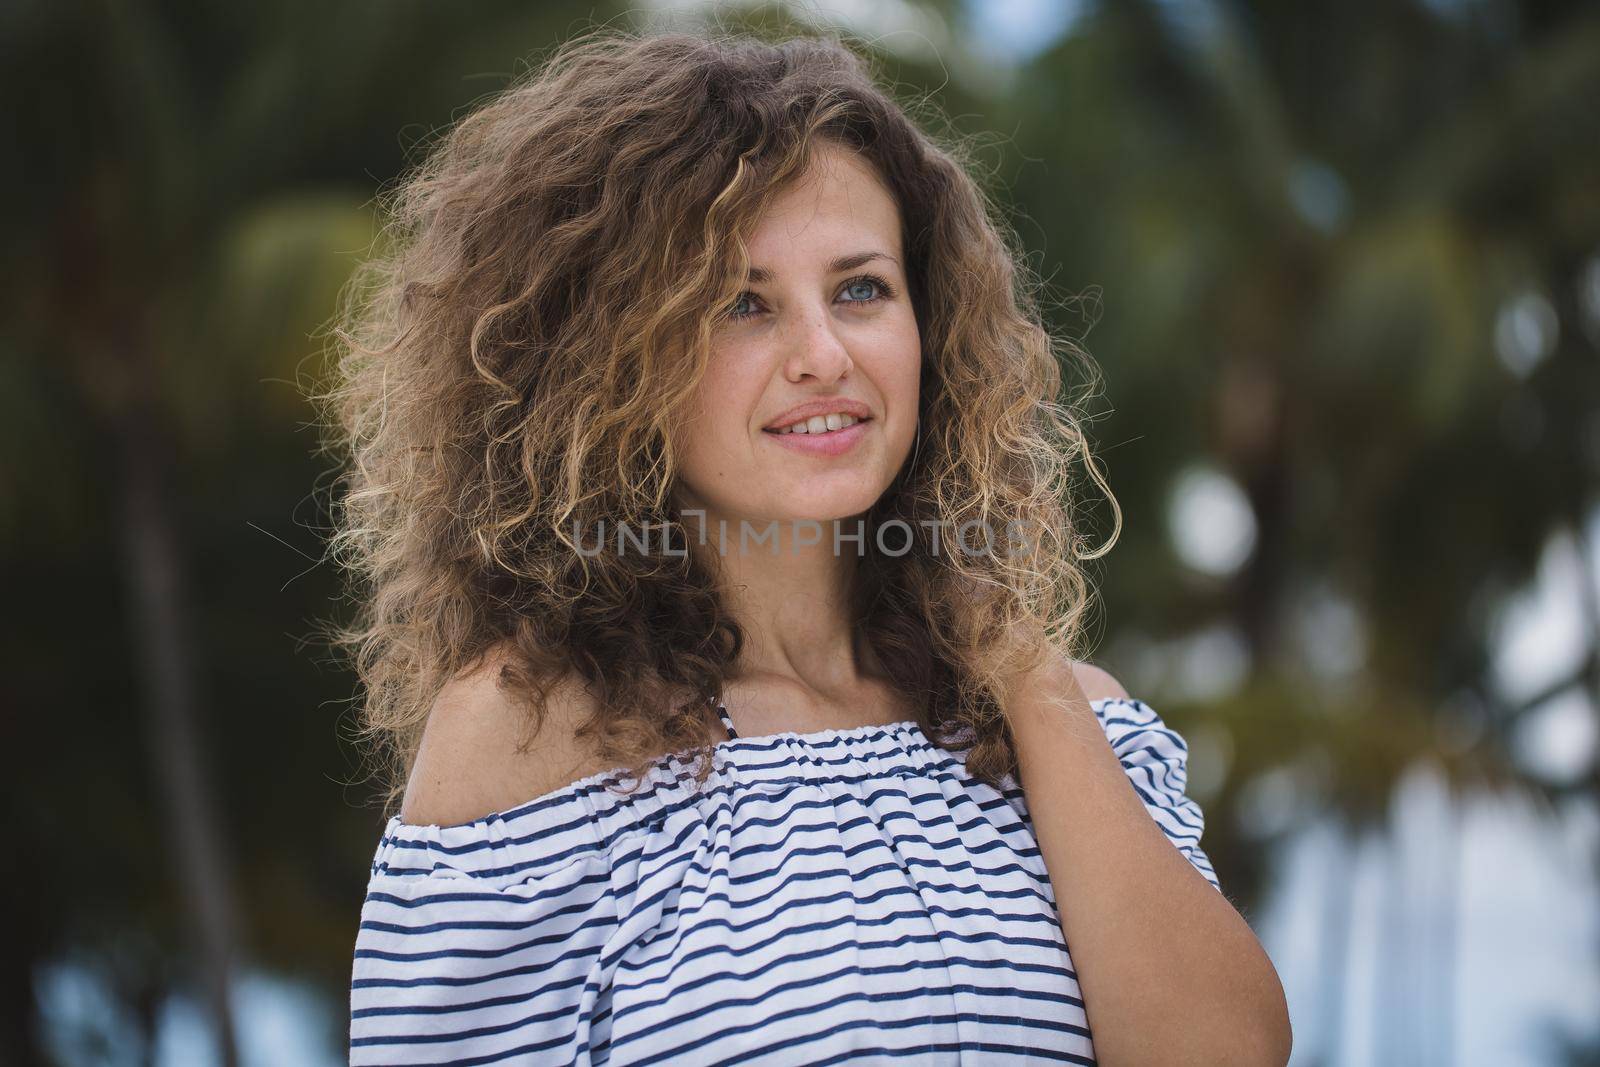 Beautiful girl on a background of palm trees. by StudioPeace